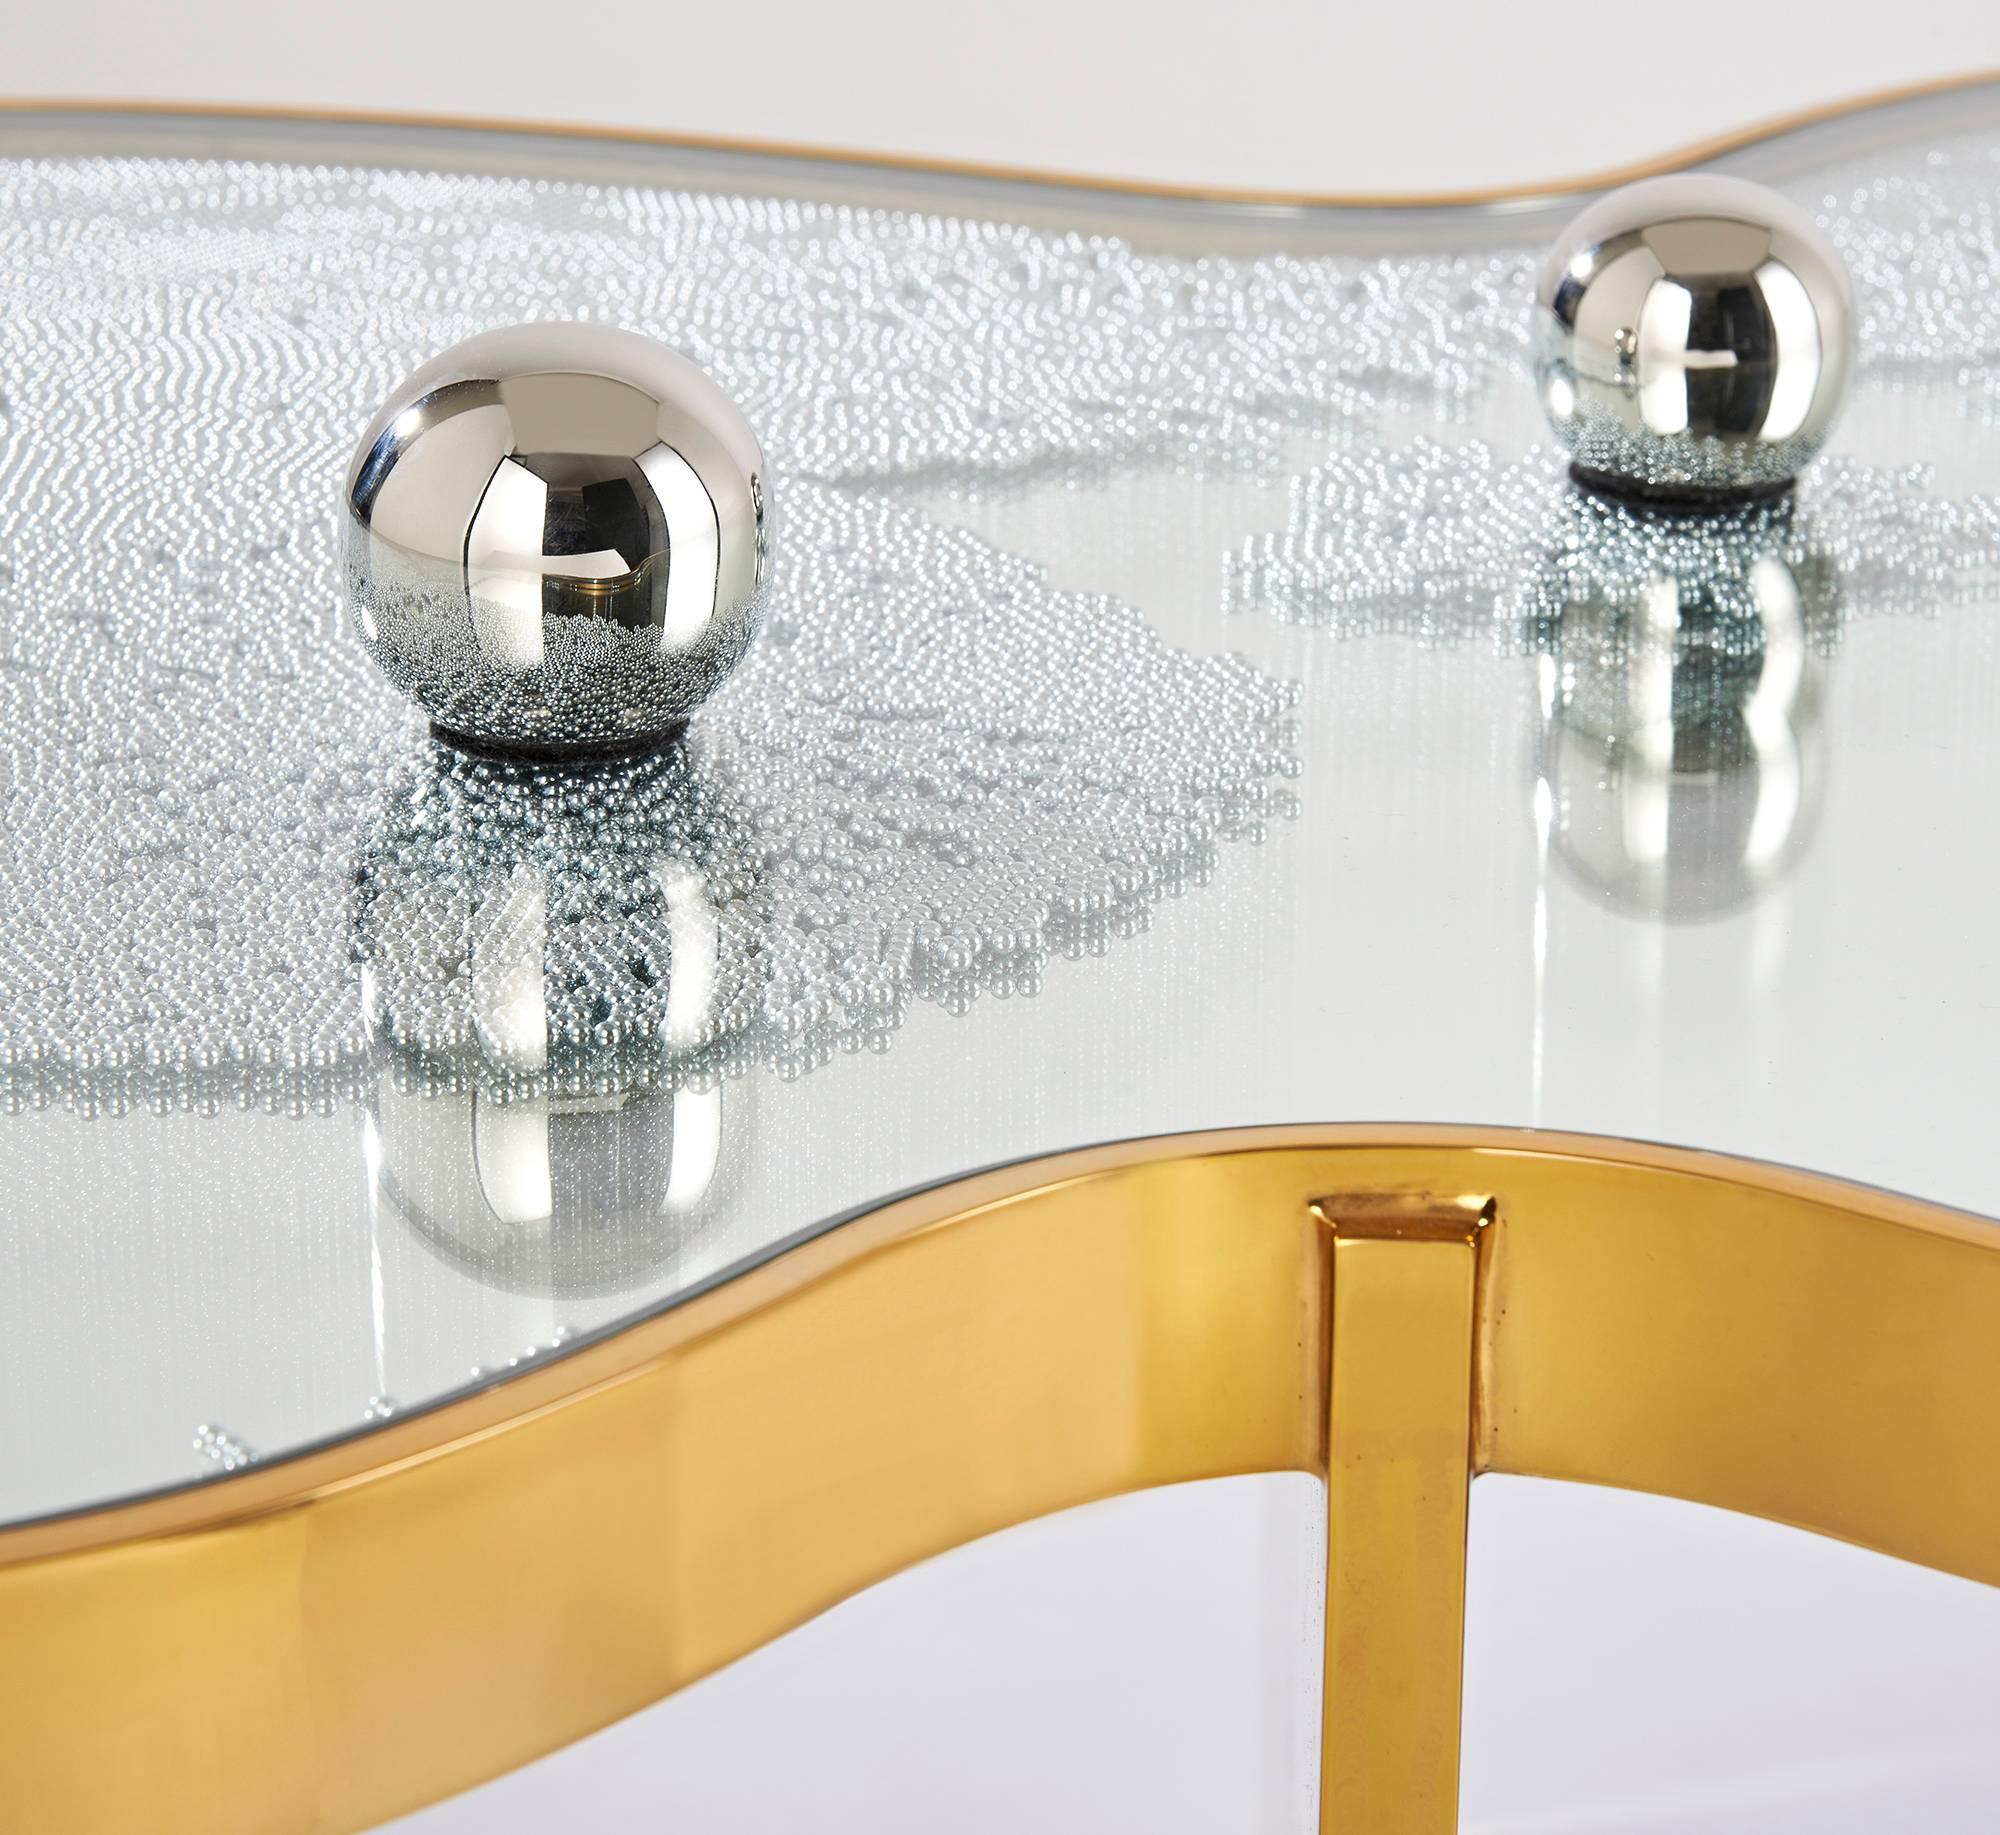 Mirror polished bronze.
Glass.
Steel ball bearings, magnets,

Limited Edition of 8.
2014.

Hubert le Gall's work is a bold combination of sophisticated and playful. Inspired by the likes of Salvador Dali, Jean Cocteau, the Surrealists and Max Ernst,